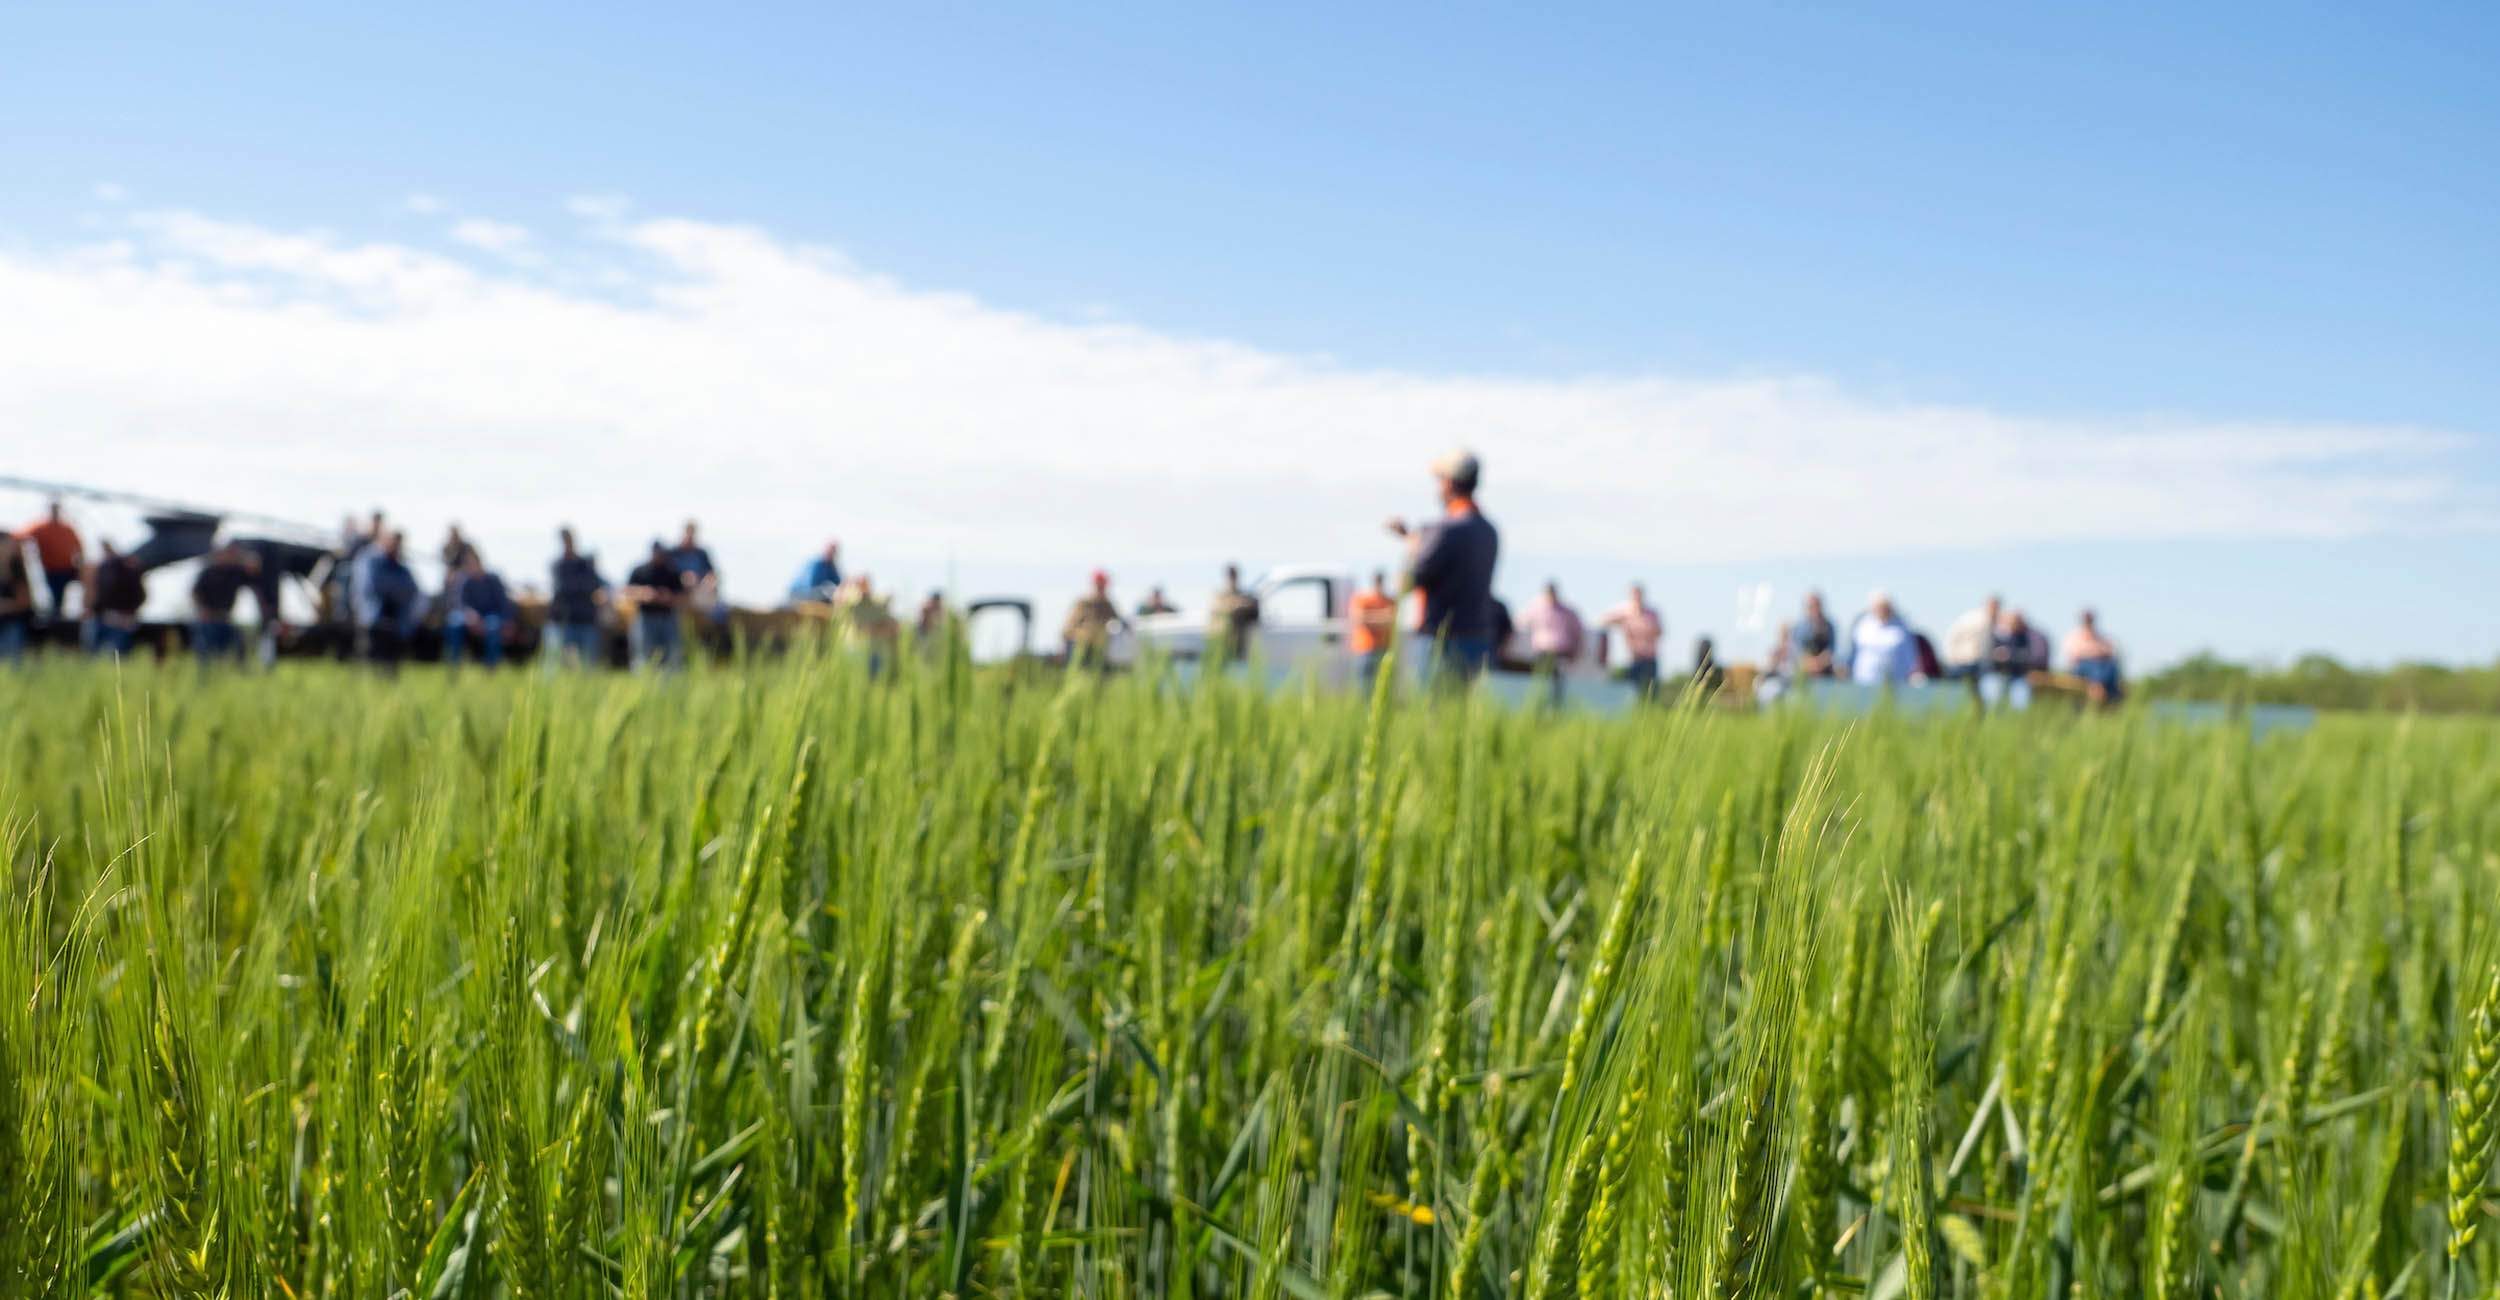 Image shot across a wheat field of people in the distance standing and watching a speaker.